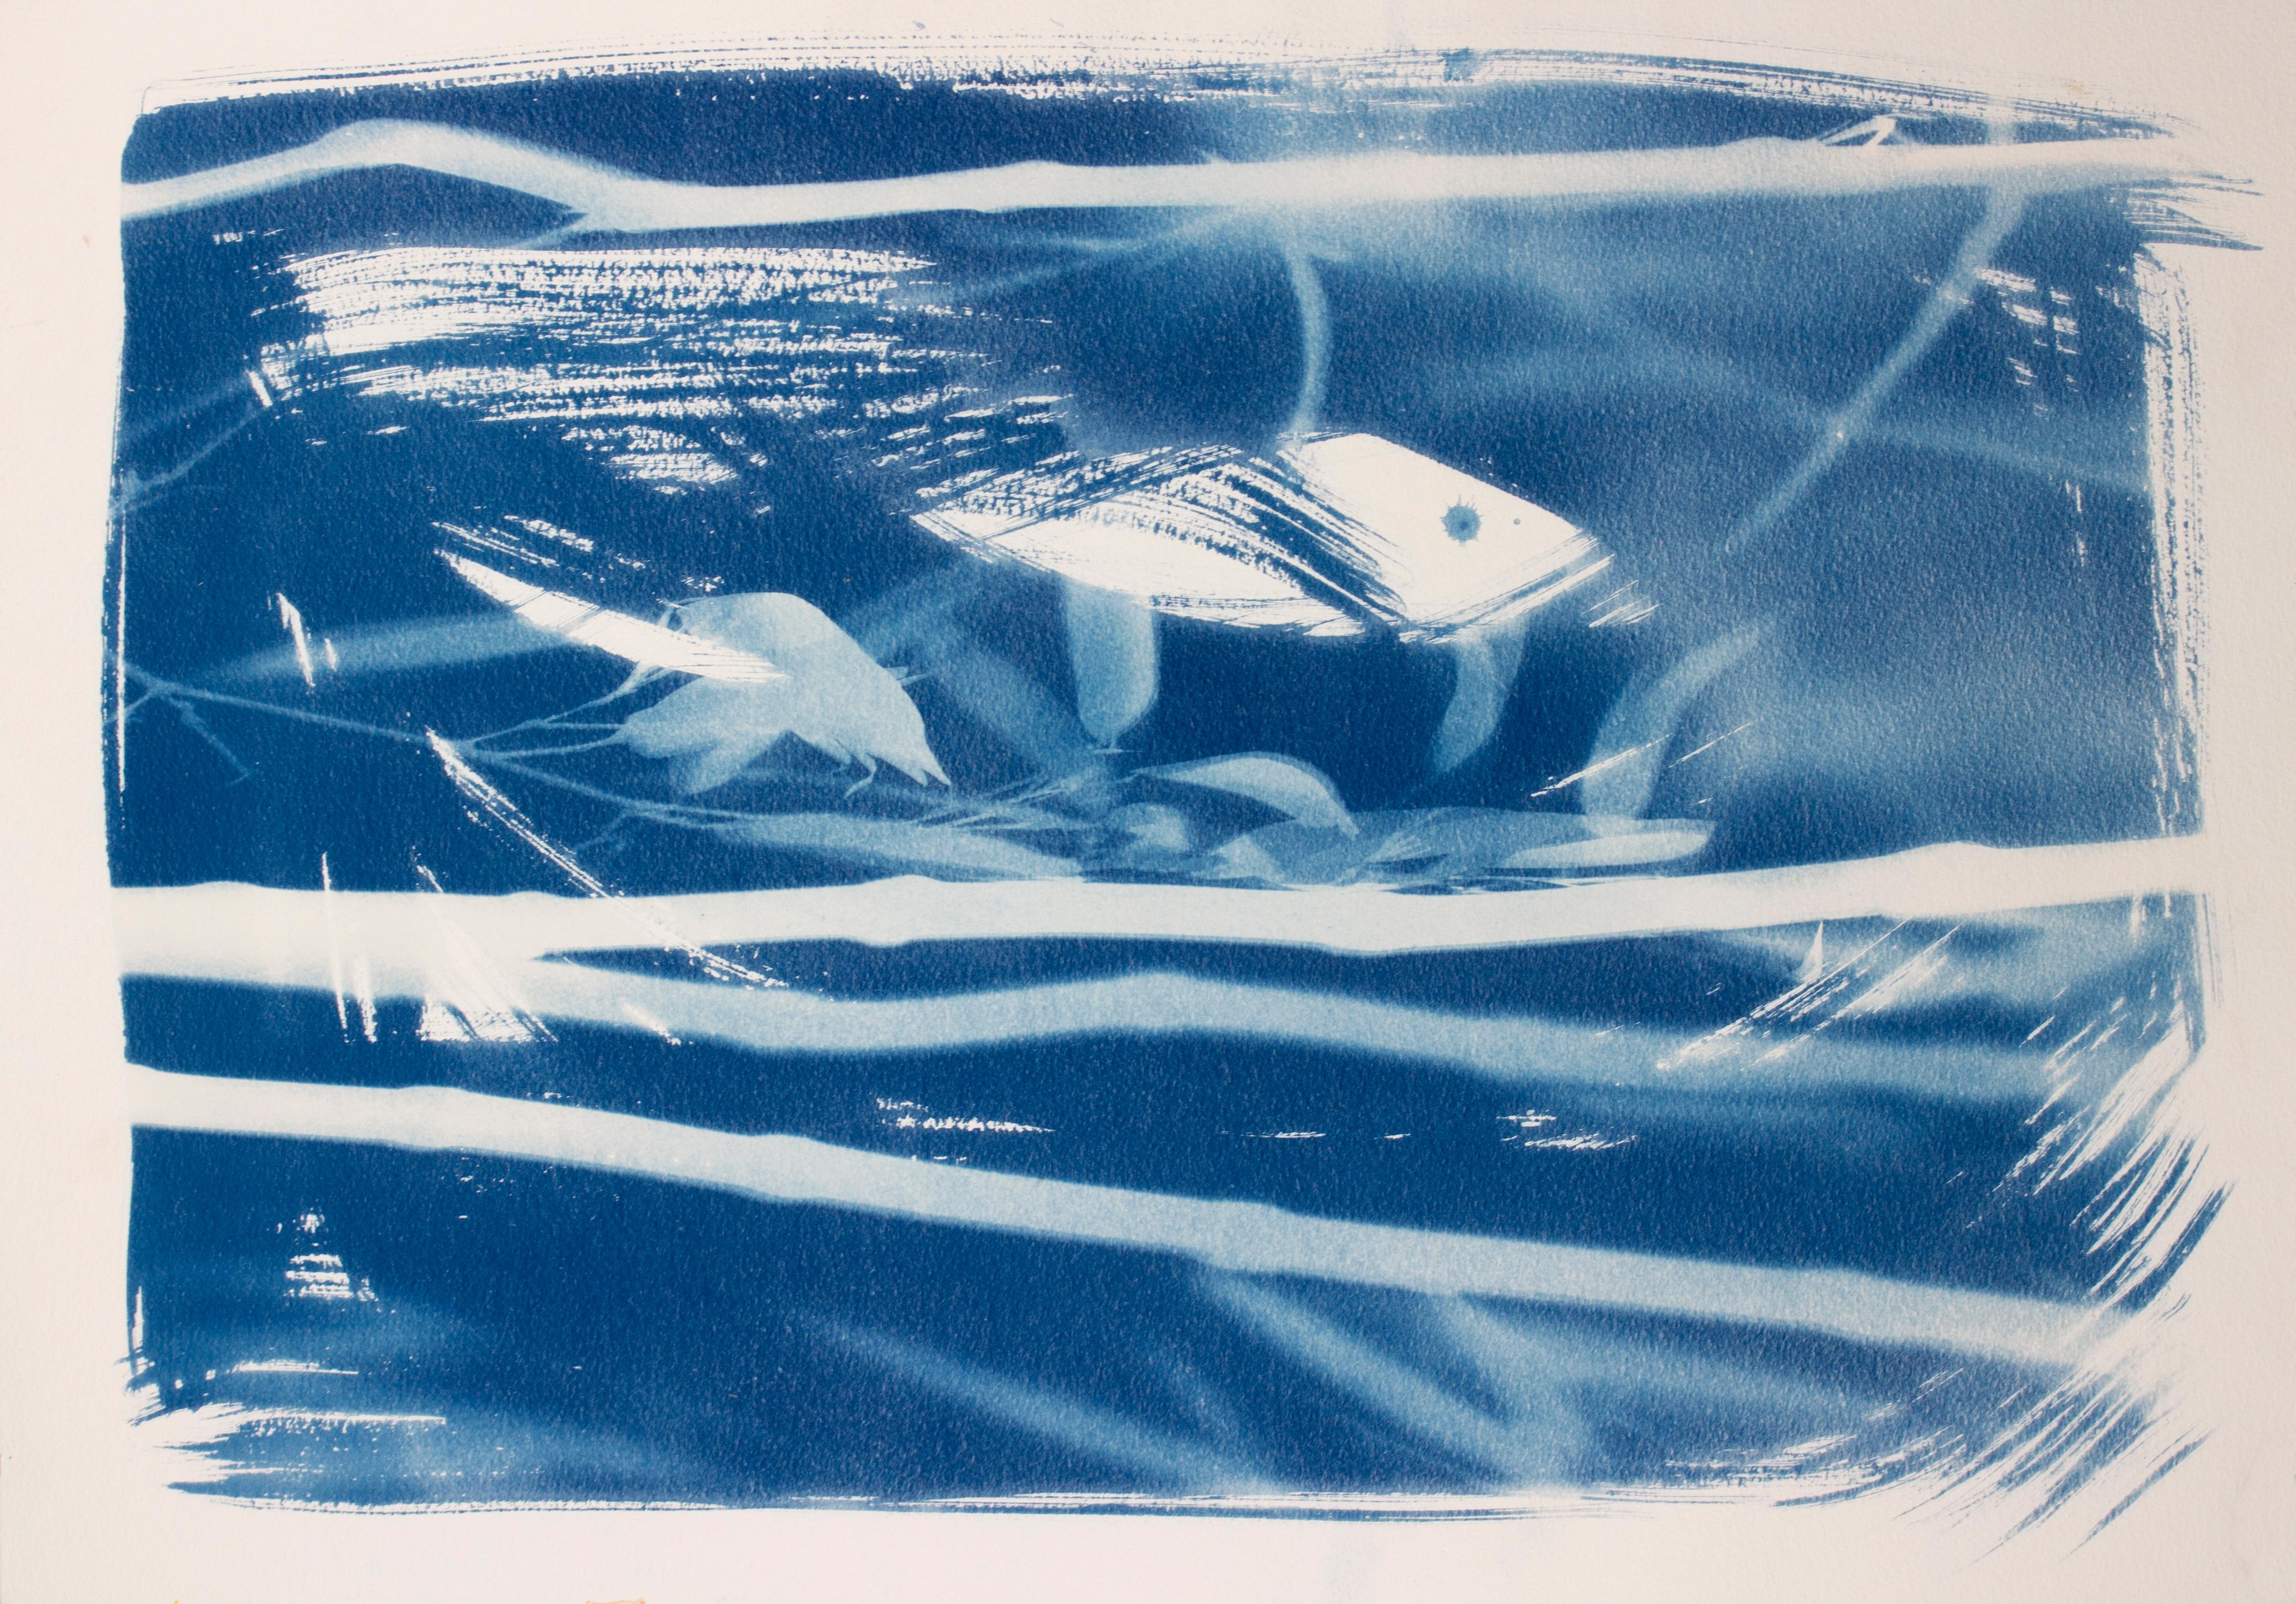 Sophia Milligan Abstract Painting - 'Pasadena Reflections'. Conceptual, botanical painting in blue and white